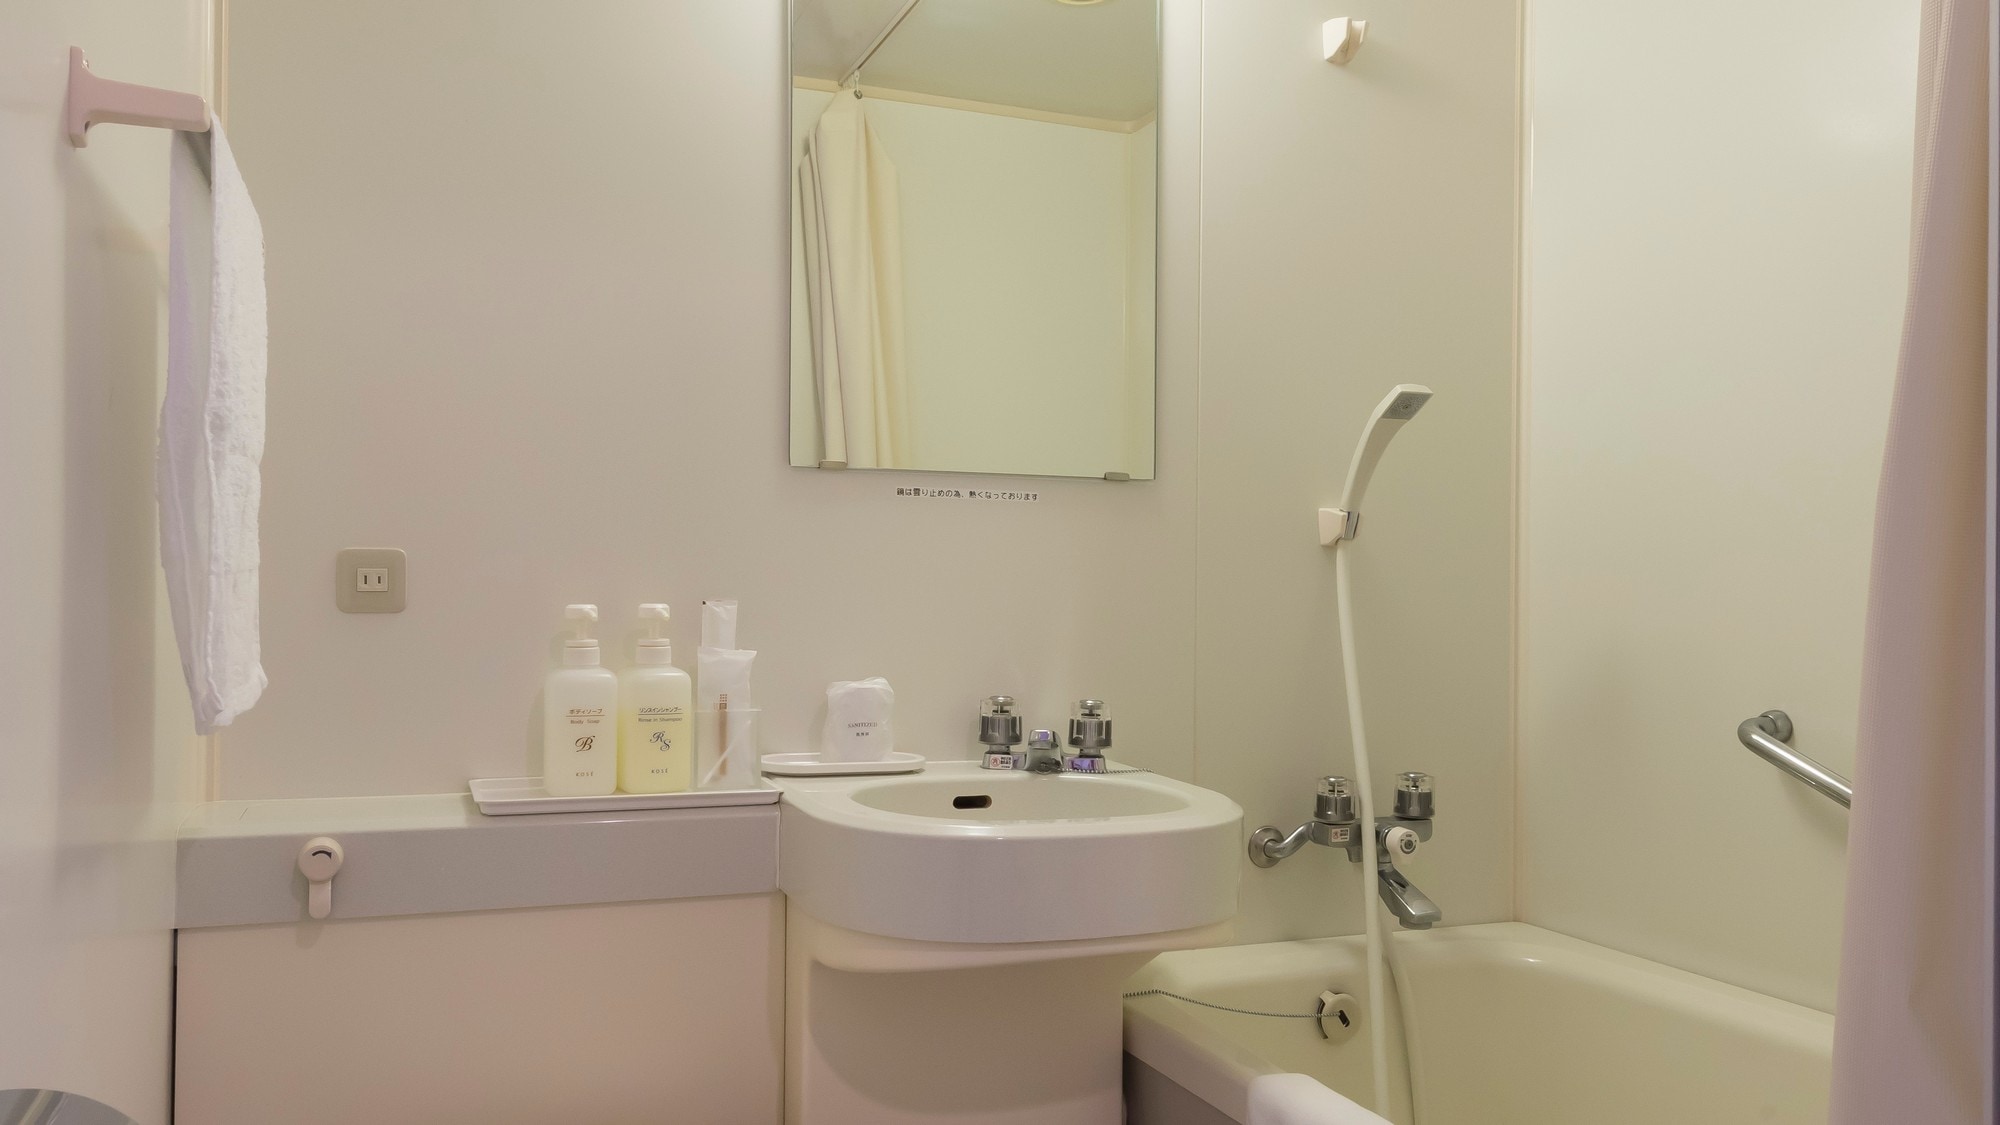 An example of a guest room unit bath